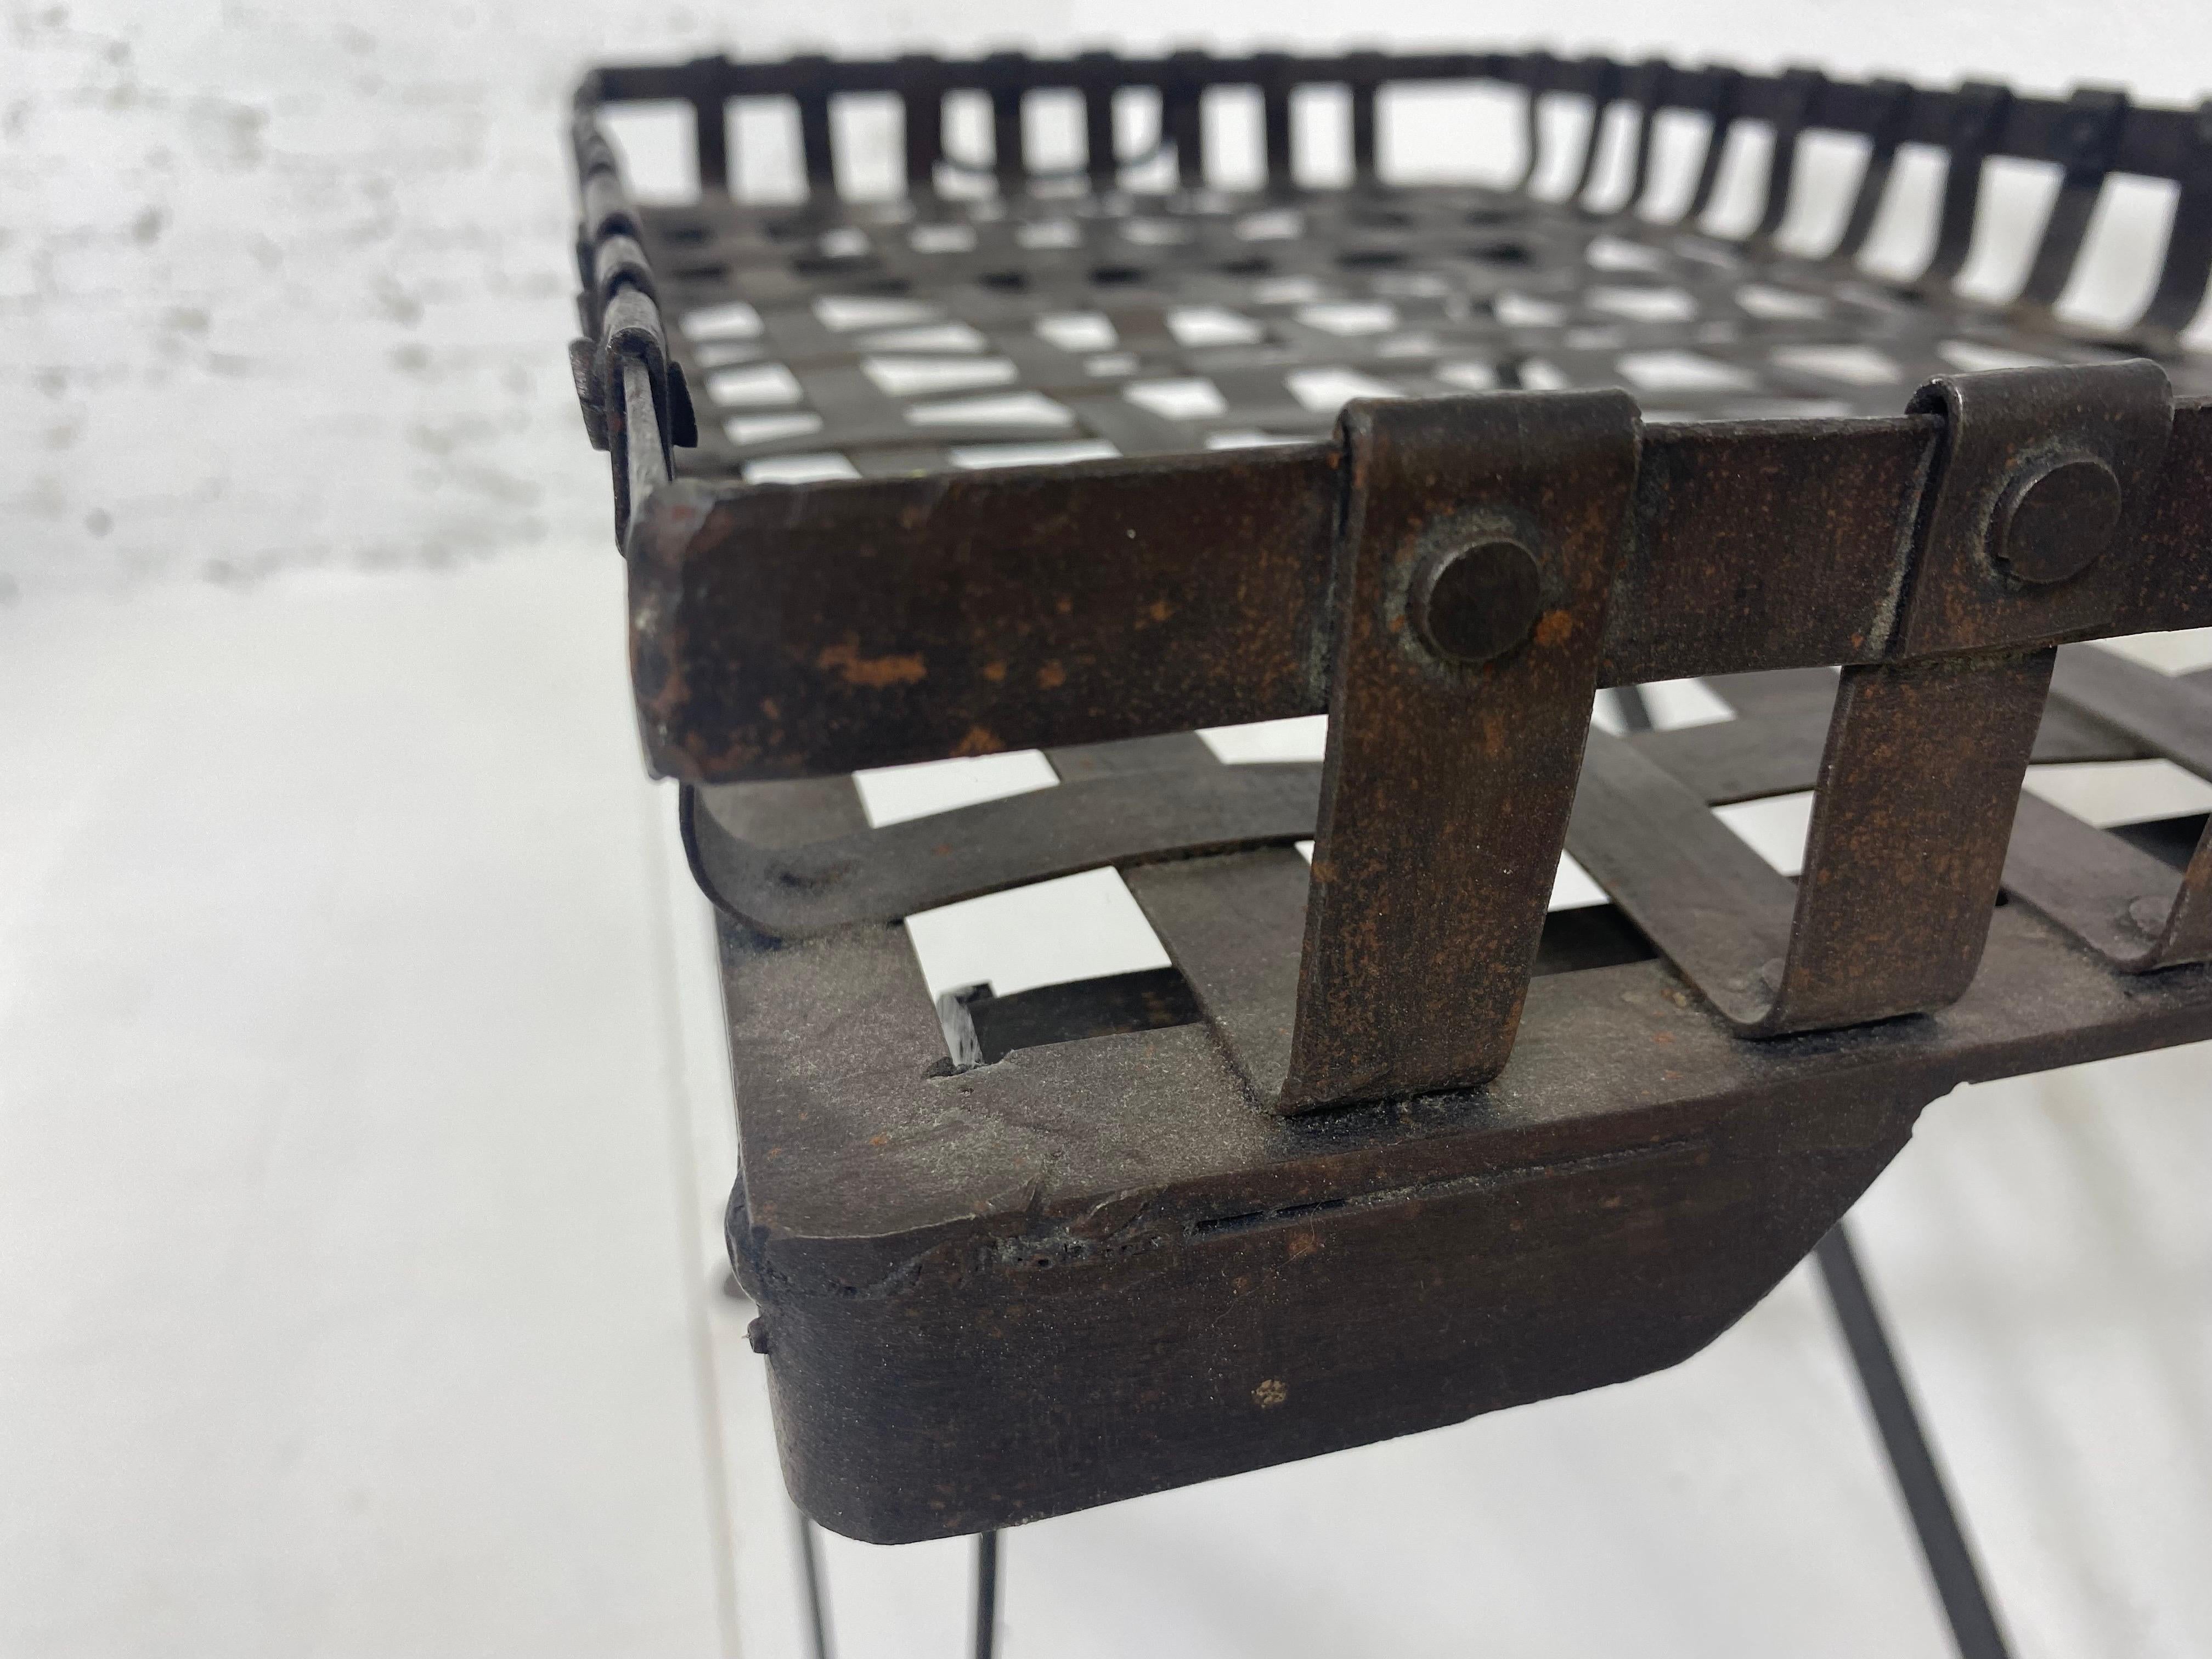 This is a vintage hand forge wrought iron campaign style tray with stand. This vintage French tray has an adjustable stand that can go higher or lower to coffee table height or tray height. The tray has a basket weave pattern in wrought iron with